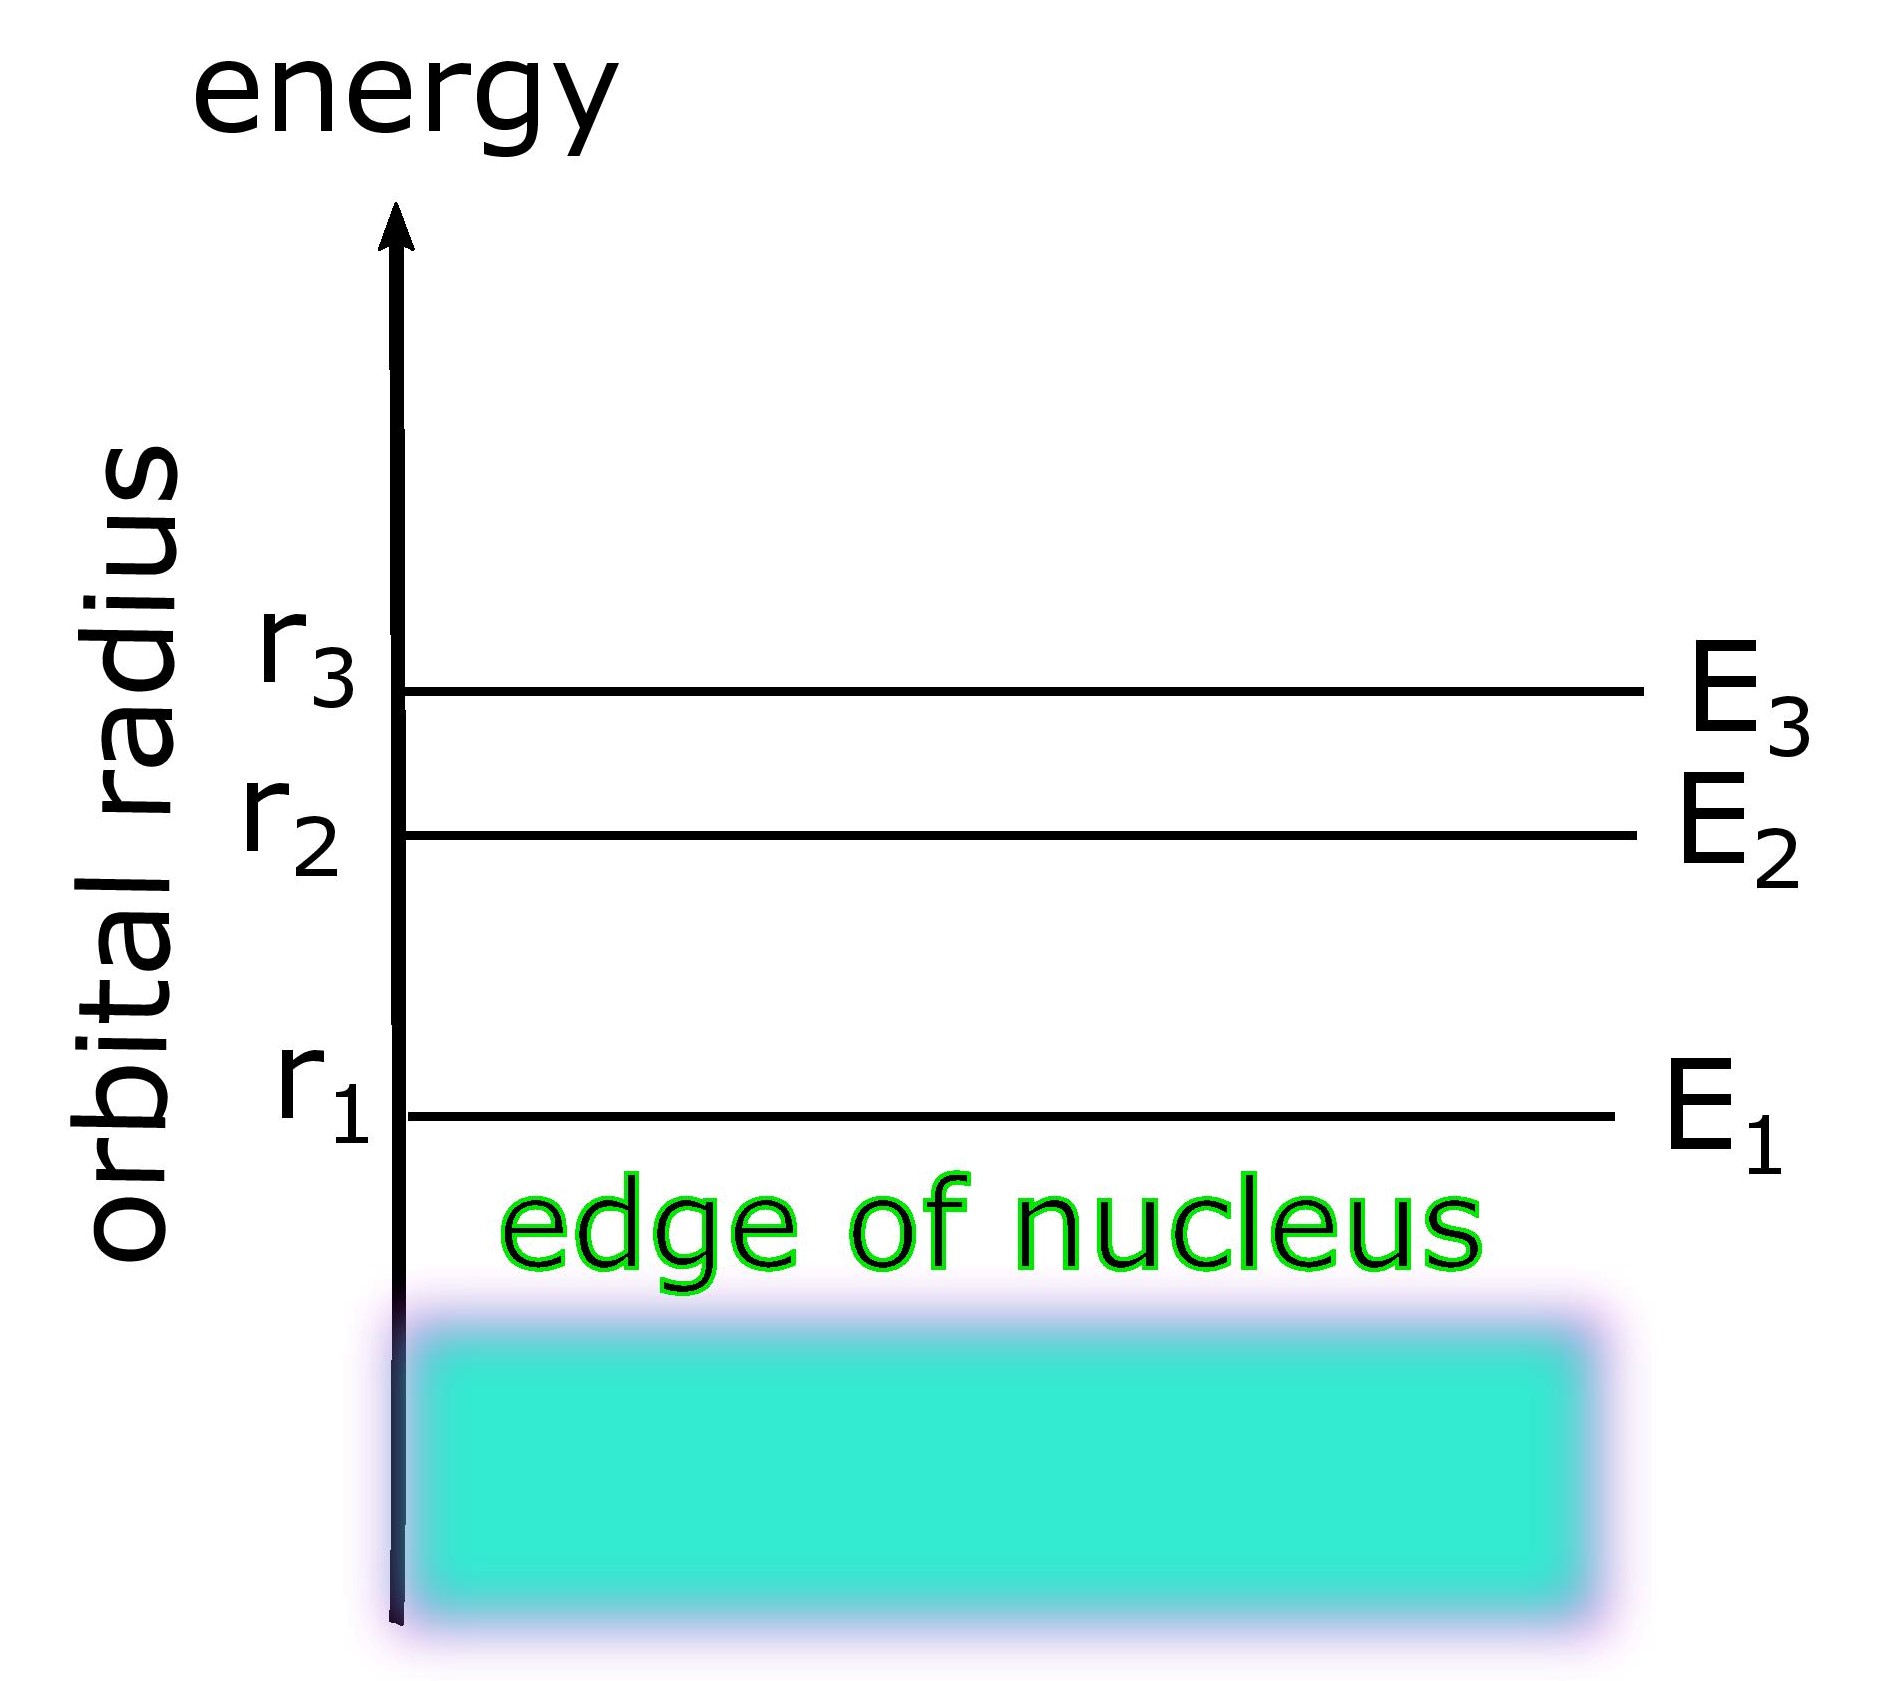 energy levels of a single electron are proportional to their orbit size.